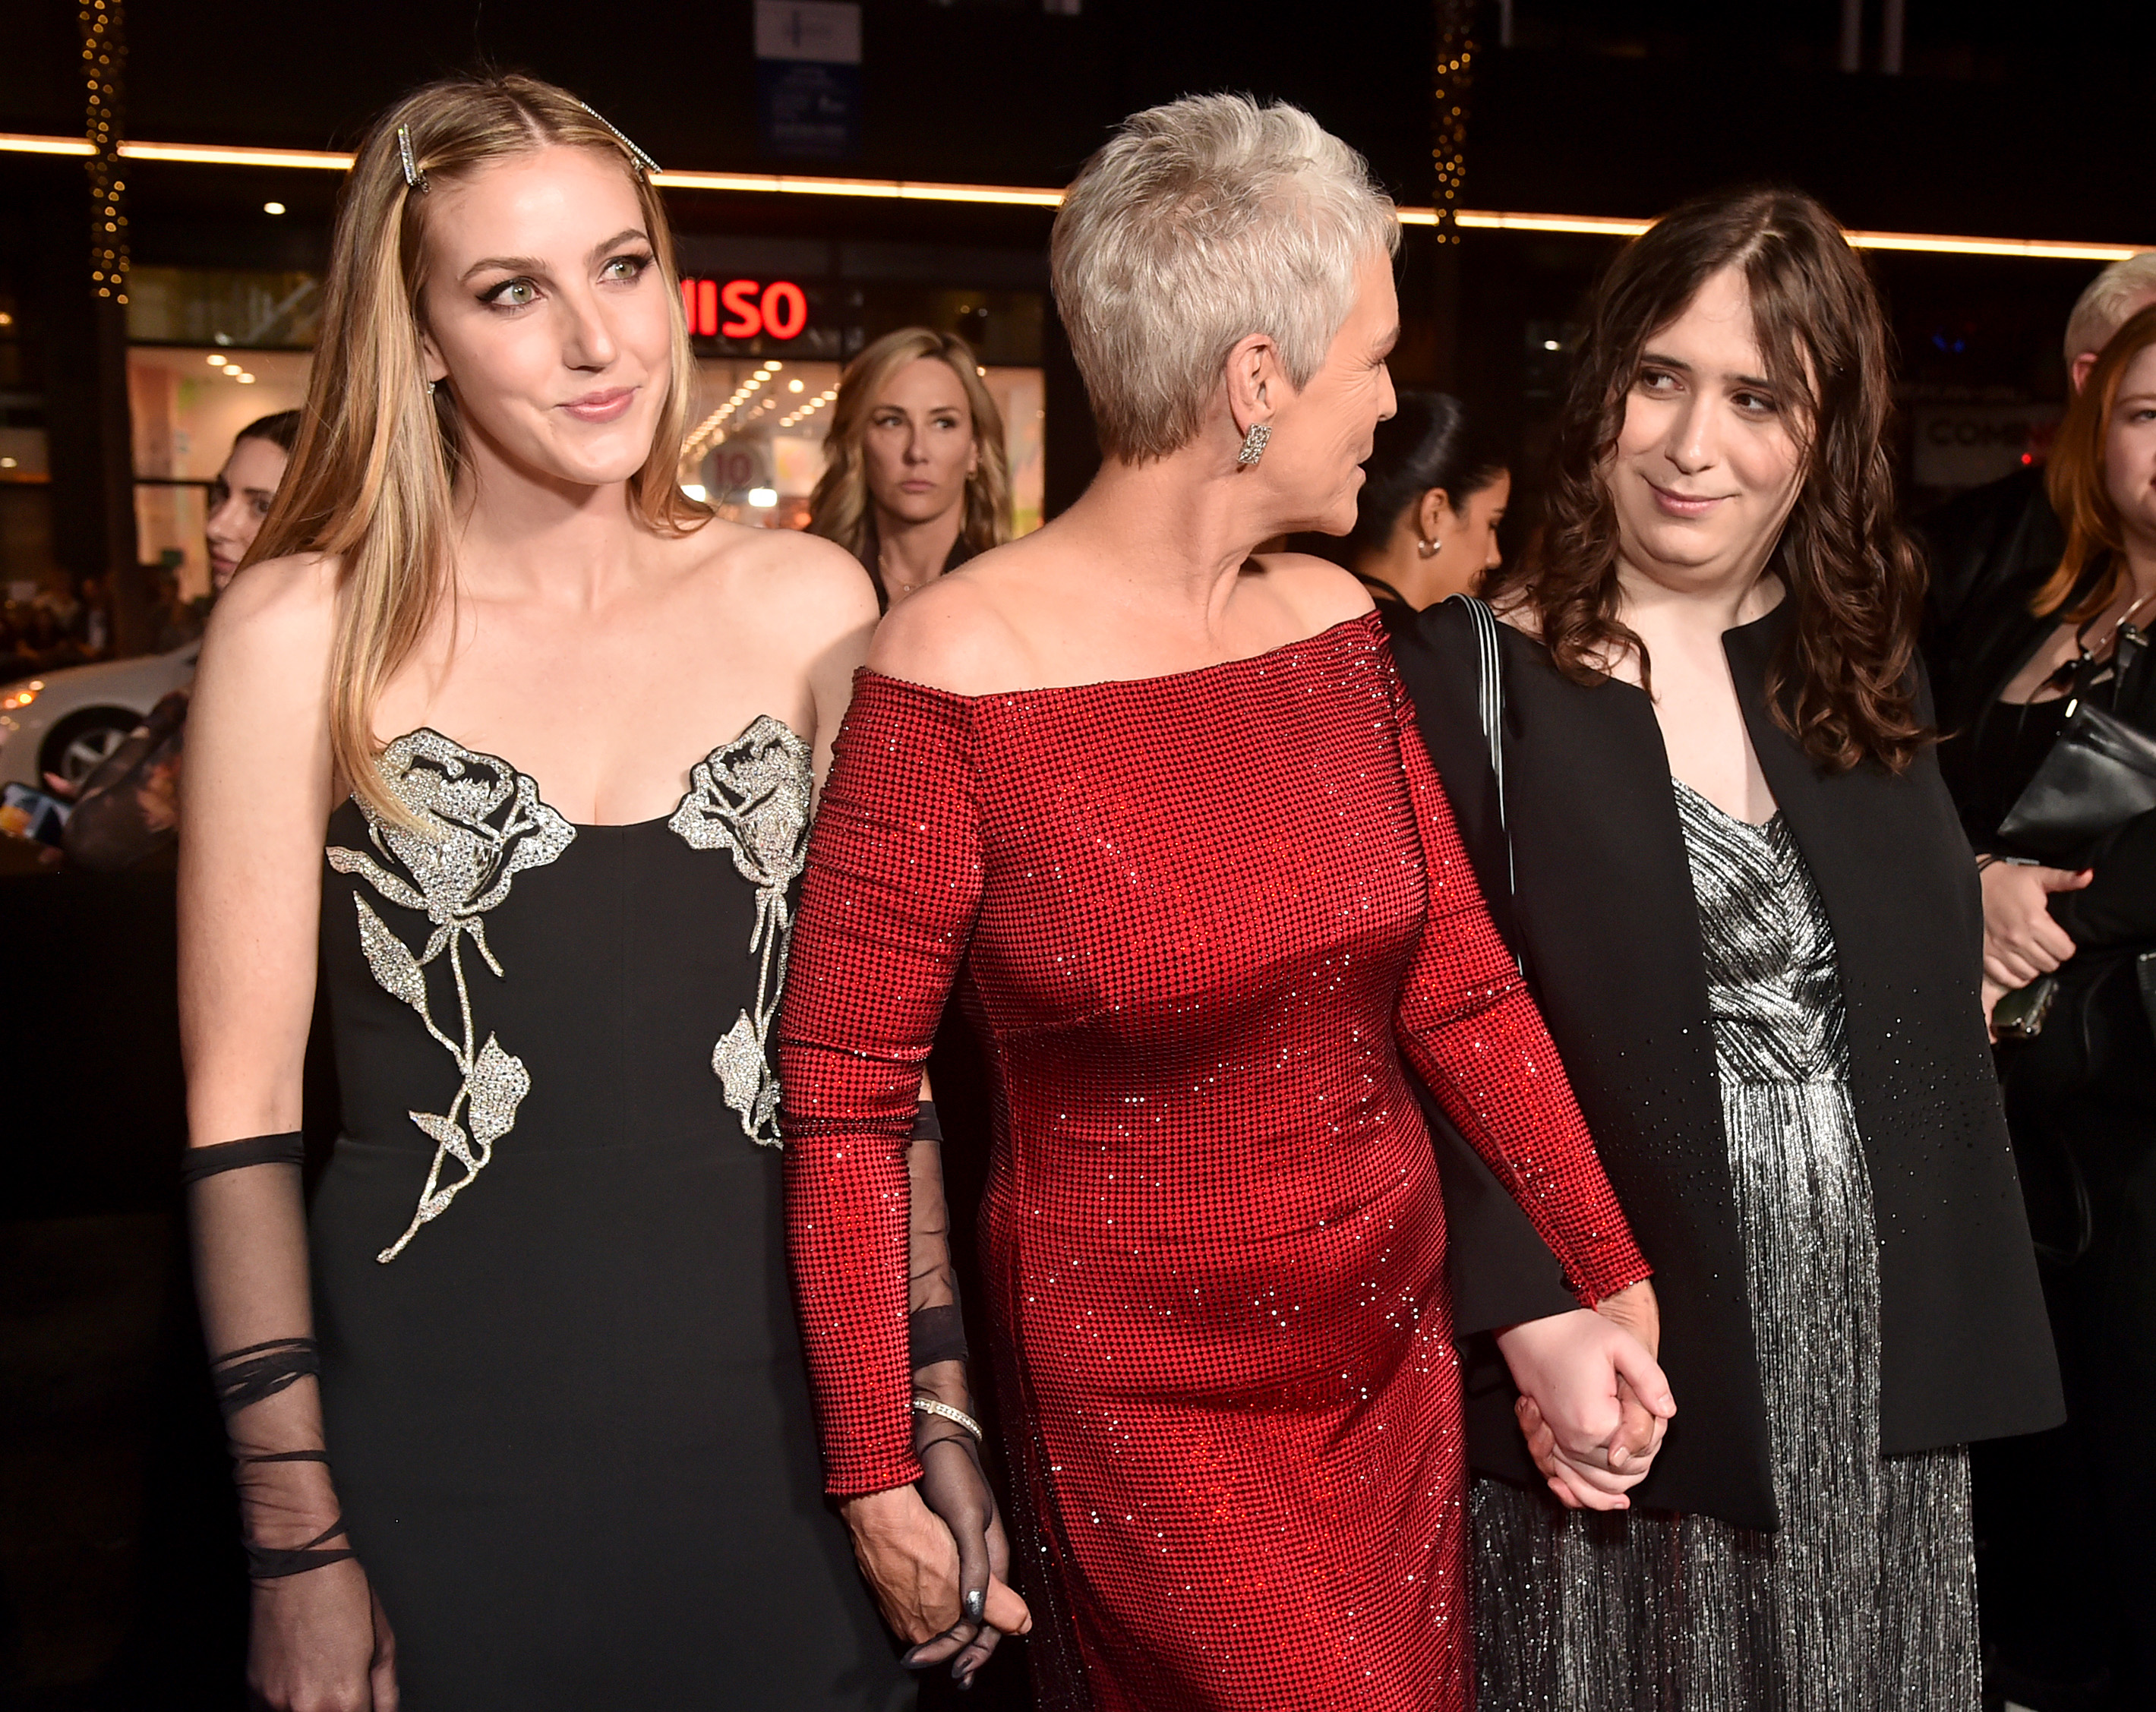 Annie Guest, Jamie Lee Curtis, and Ruby Guest at the World Premiere of "Halloween Ends" on October 11, 2022, in Hollywood, California | Source: Getty Images